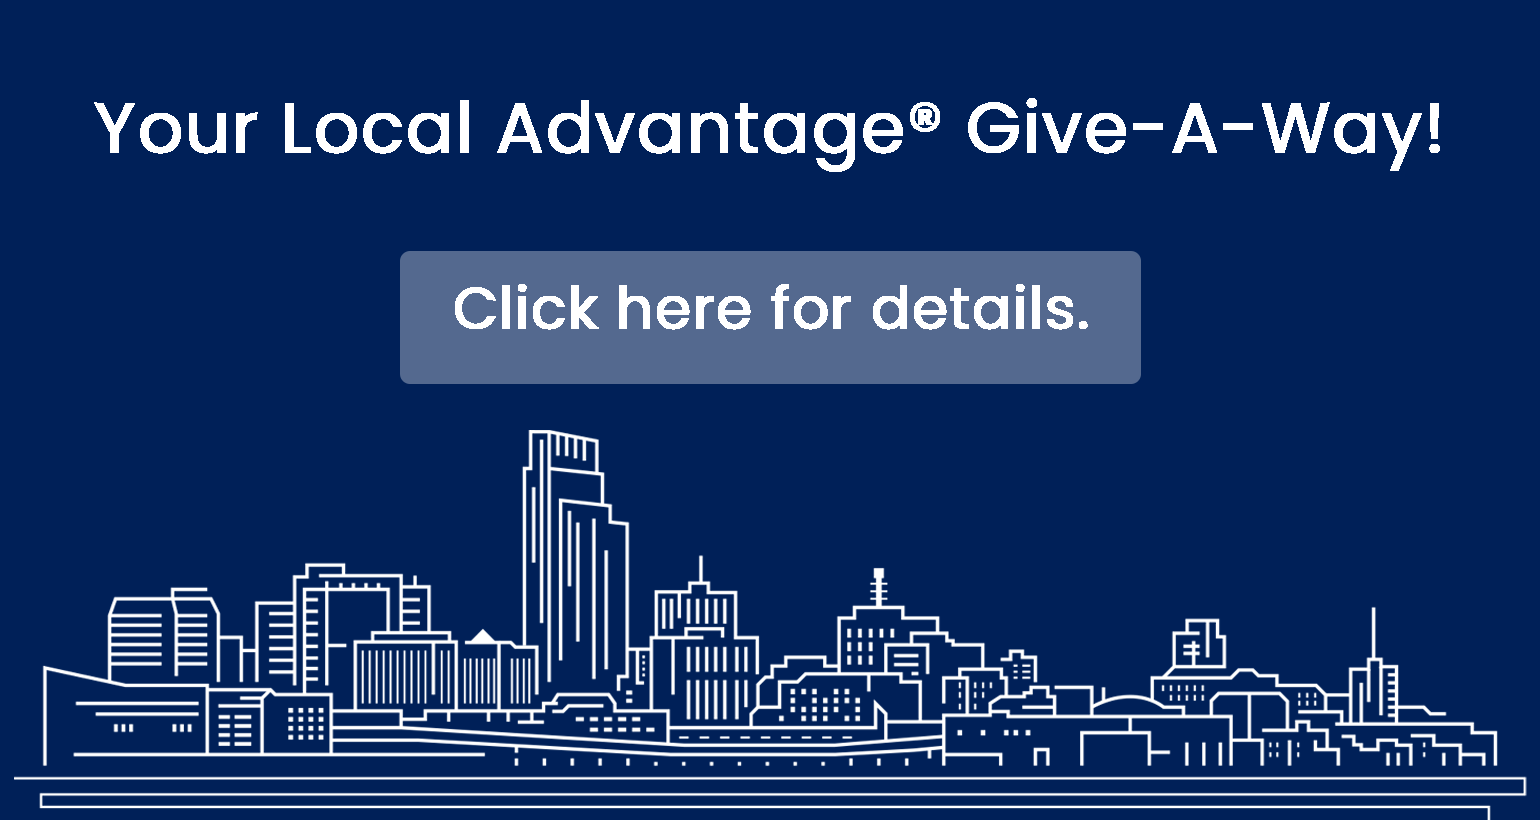 Your local advantage giveaway. Click here for details.